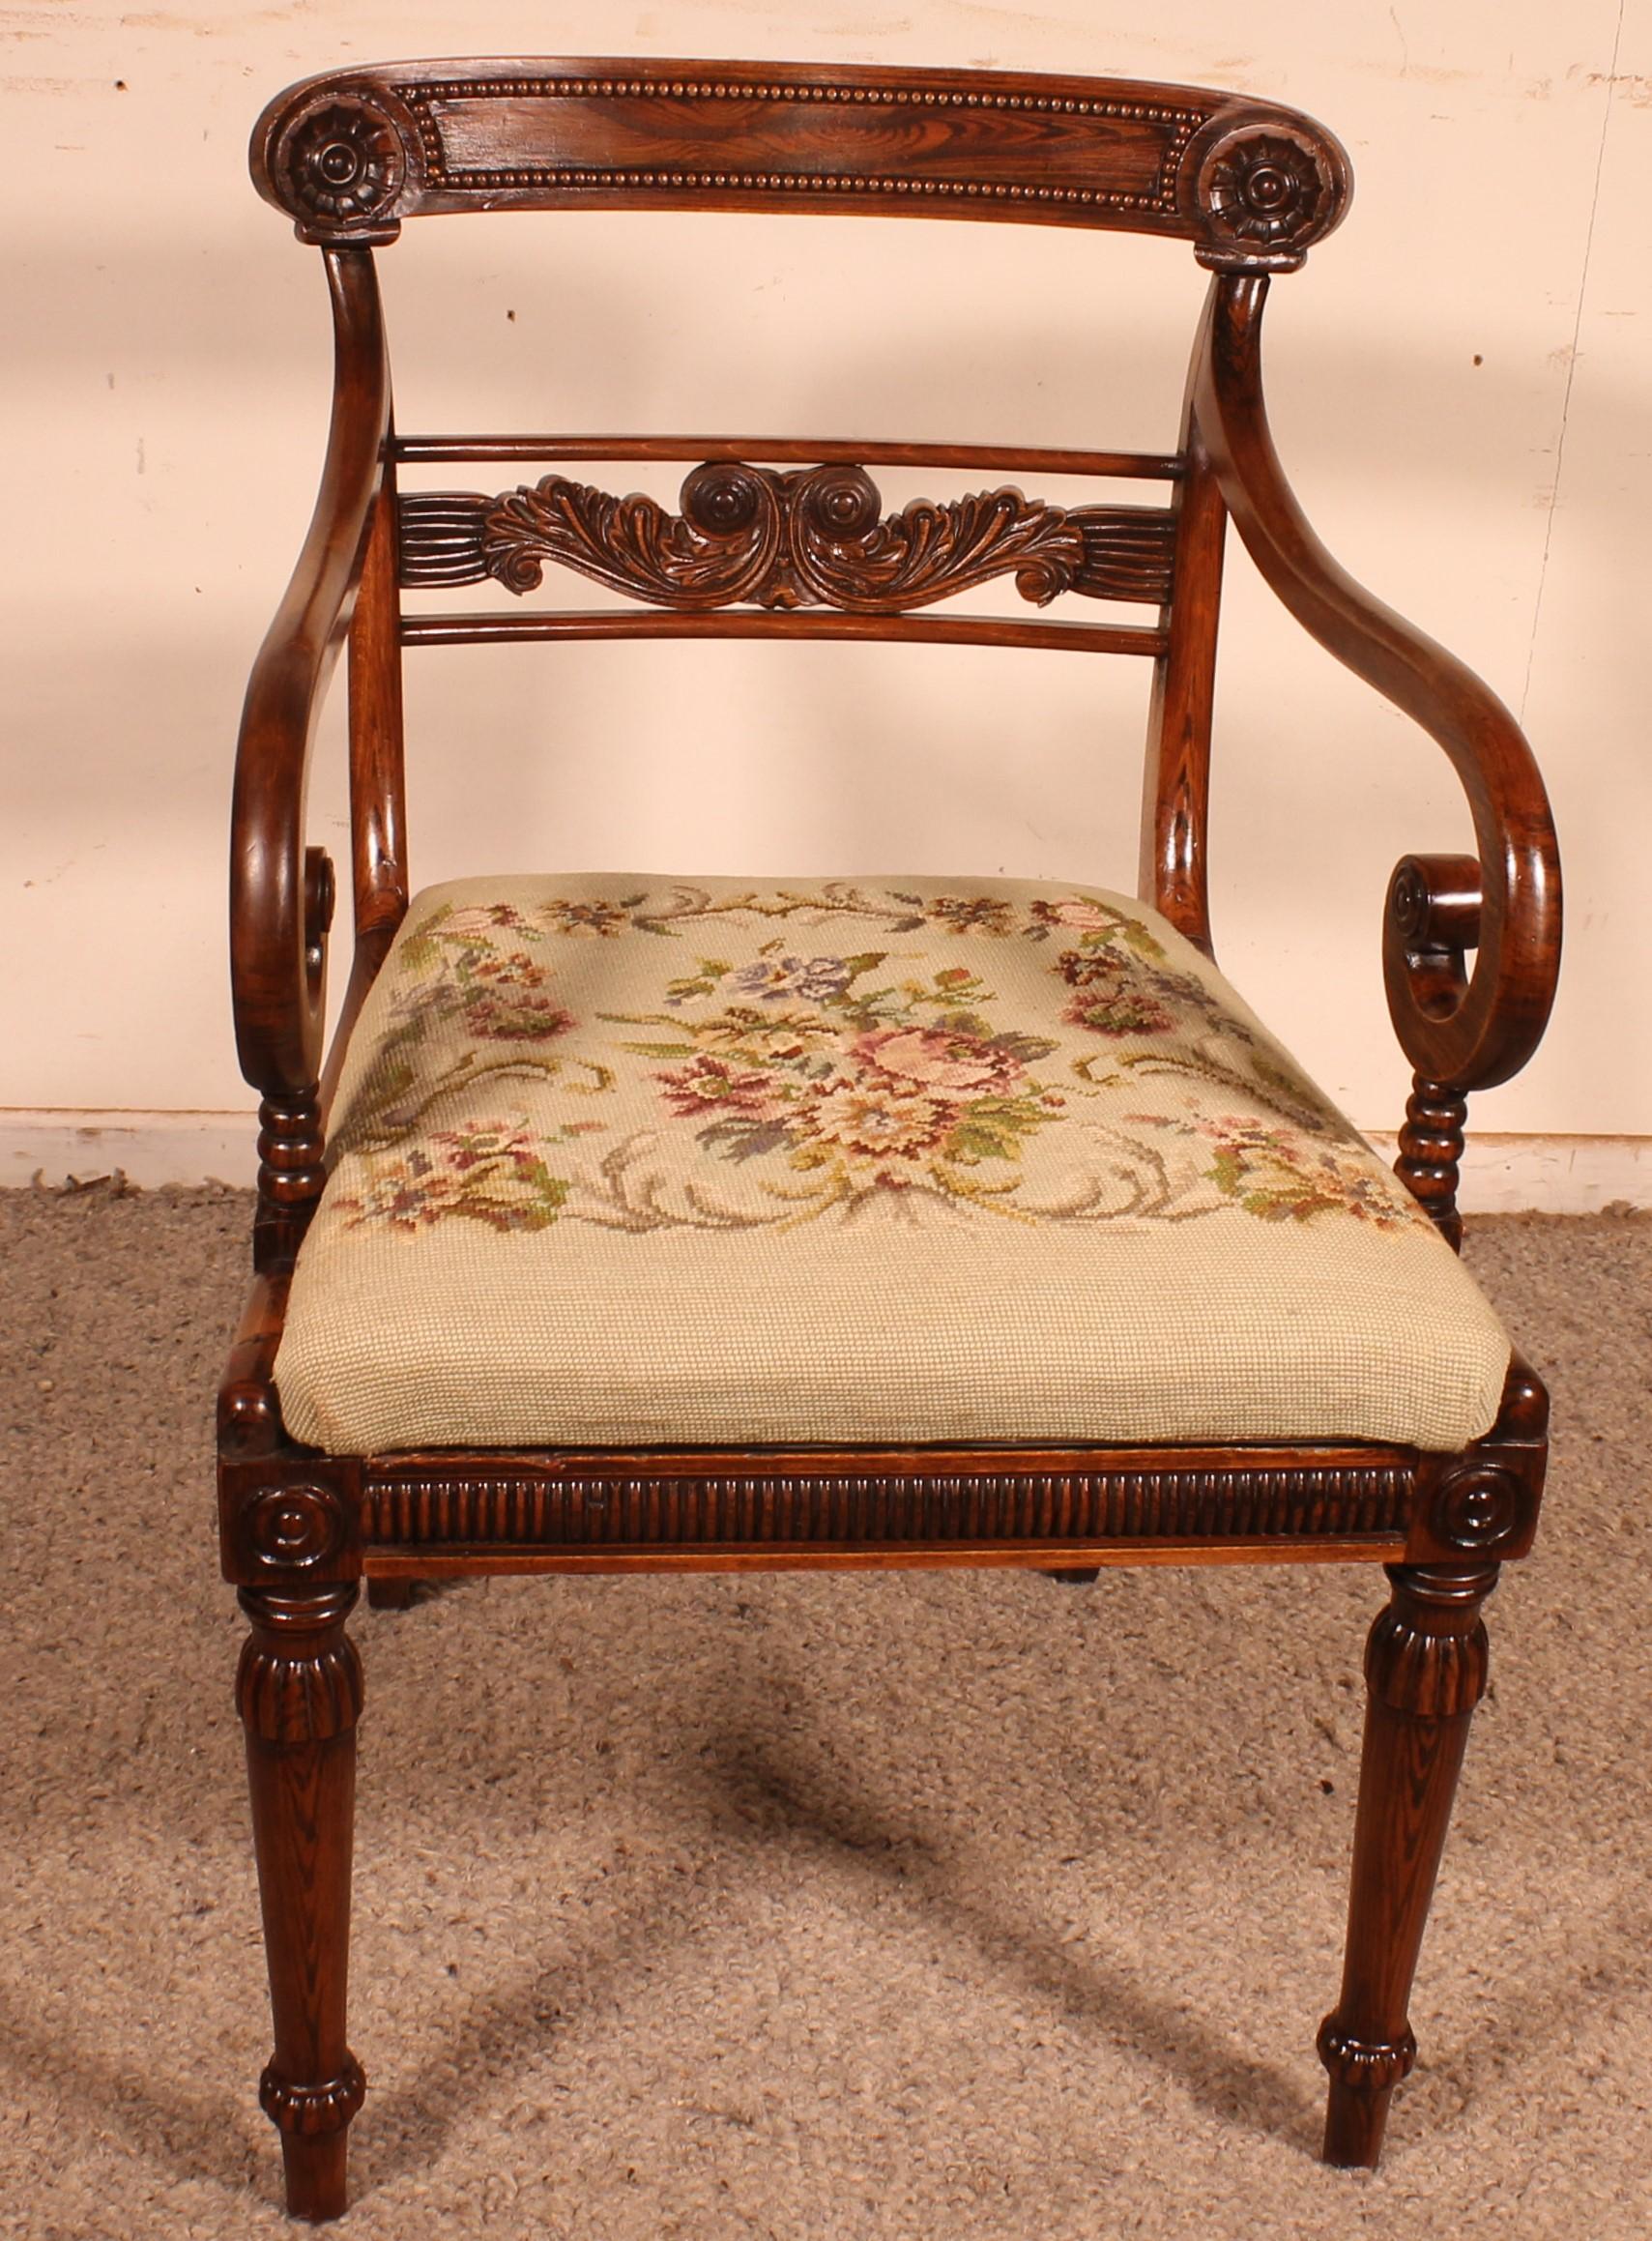 Lovely rosewood armchair from the beginning of the 19th century Regency period
Very beautiful base decorated with a beading The backrest is also decorated with a beading as well as a carving in its centre
The seat is lined with a tapestry (removable